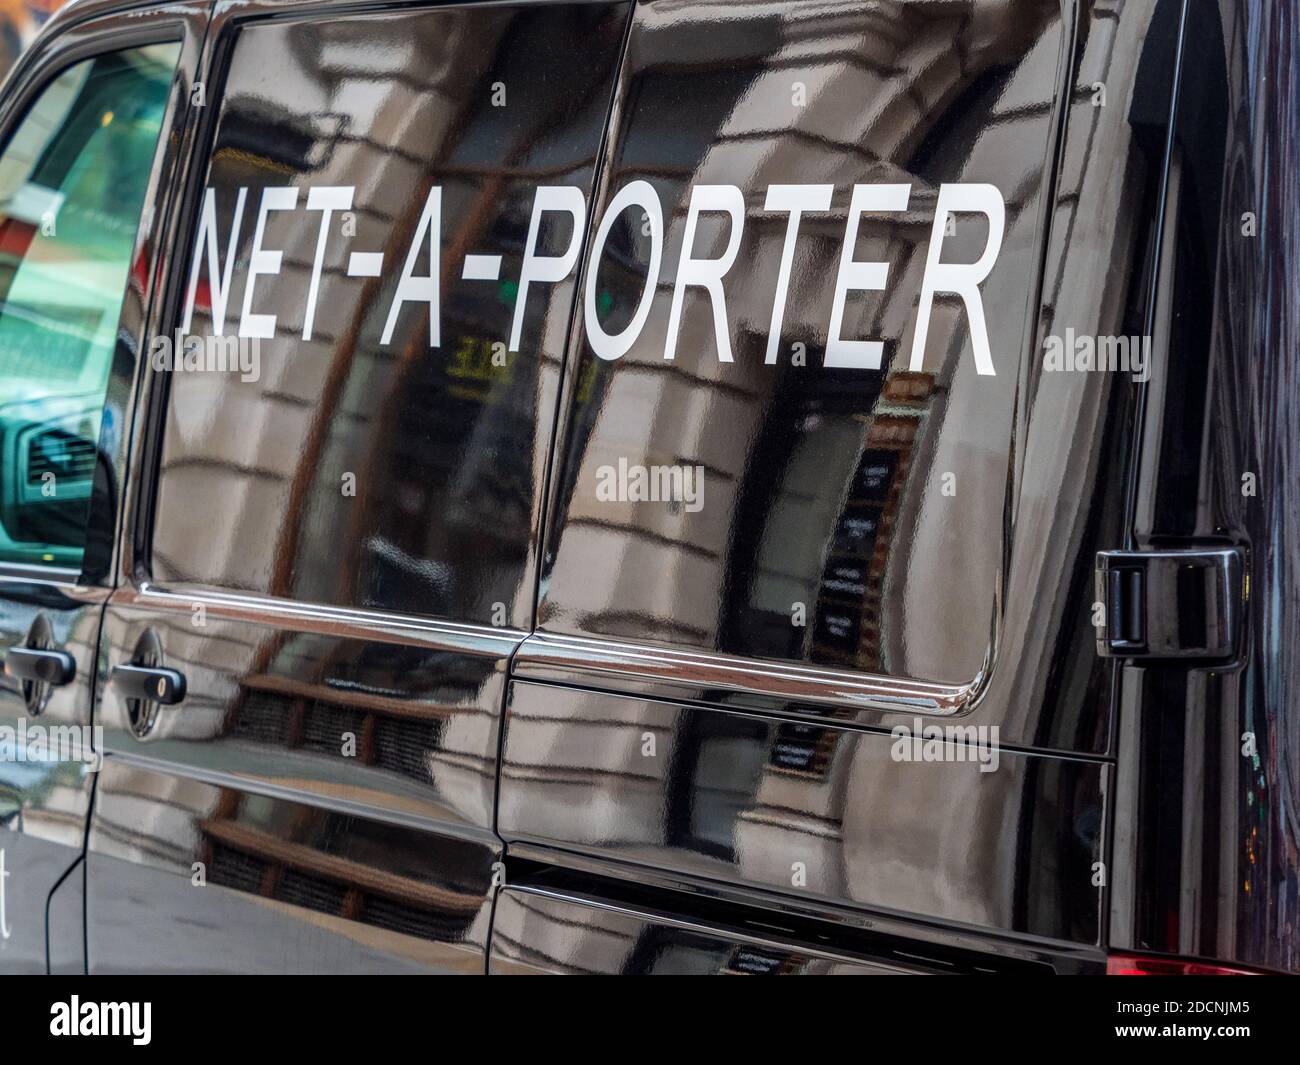 Net-a-Porter Fashion Delivery Van in Central London - Net a Porter is an Italian online fashion retailer created in 2015. Stock Photo